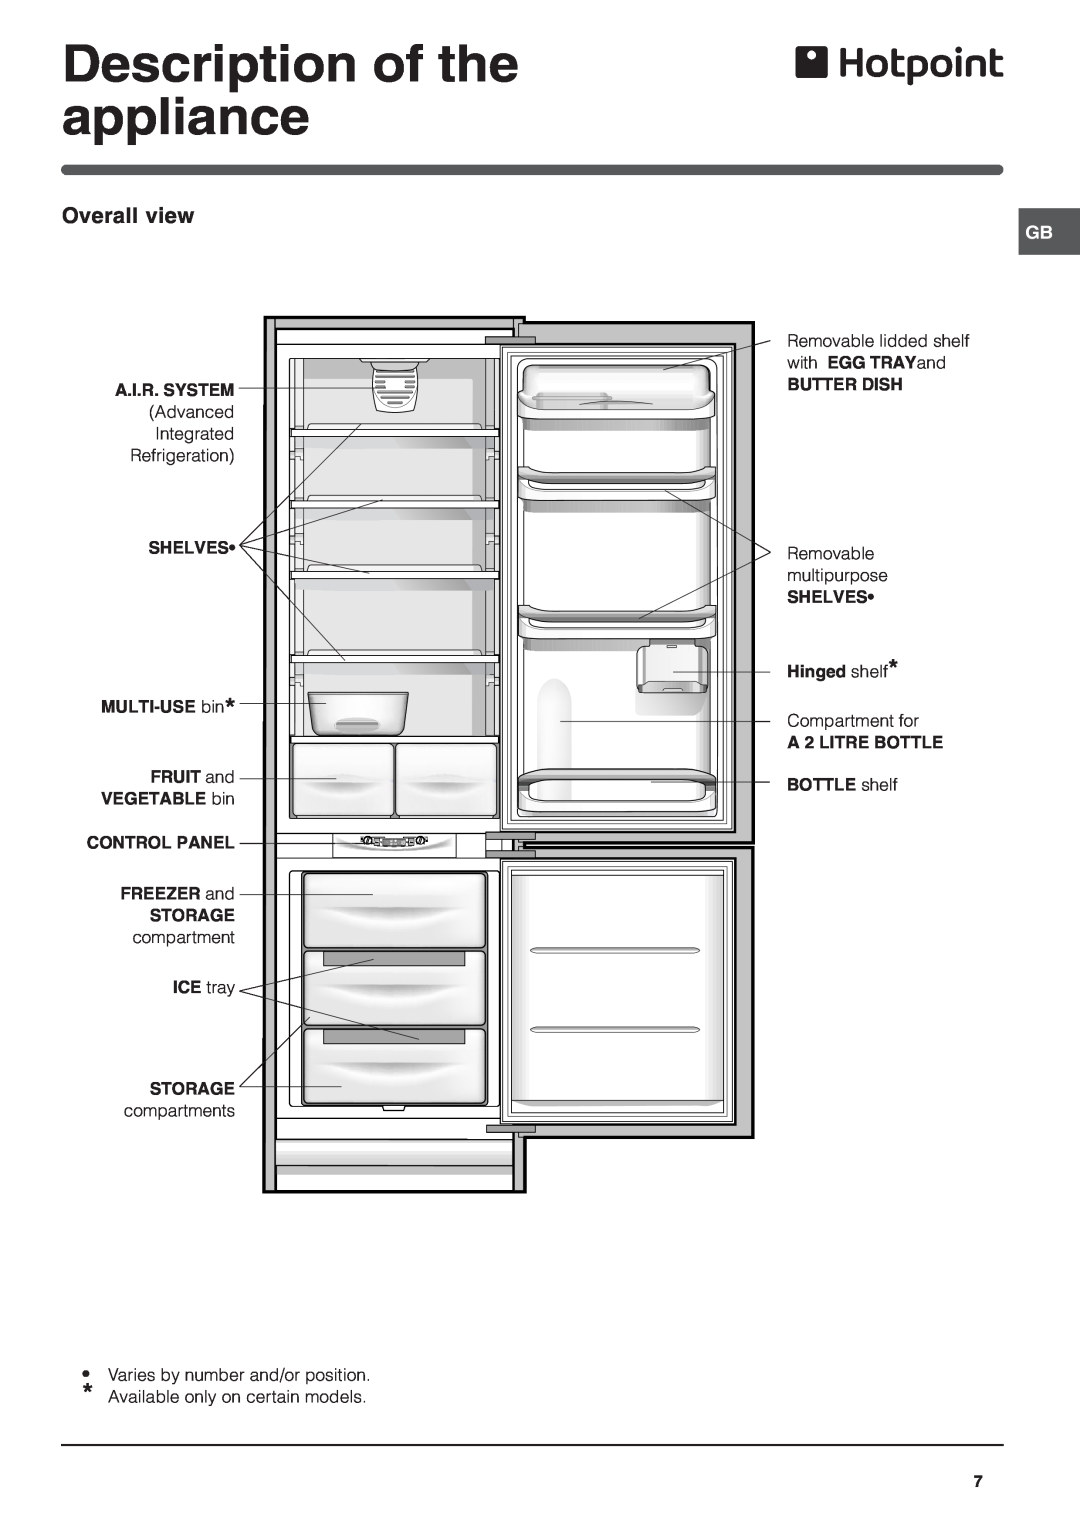 Hotpoint HME35 manual Description of the appliance, Overall view, Advanced, Integrated, Refrigeration, compartments 